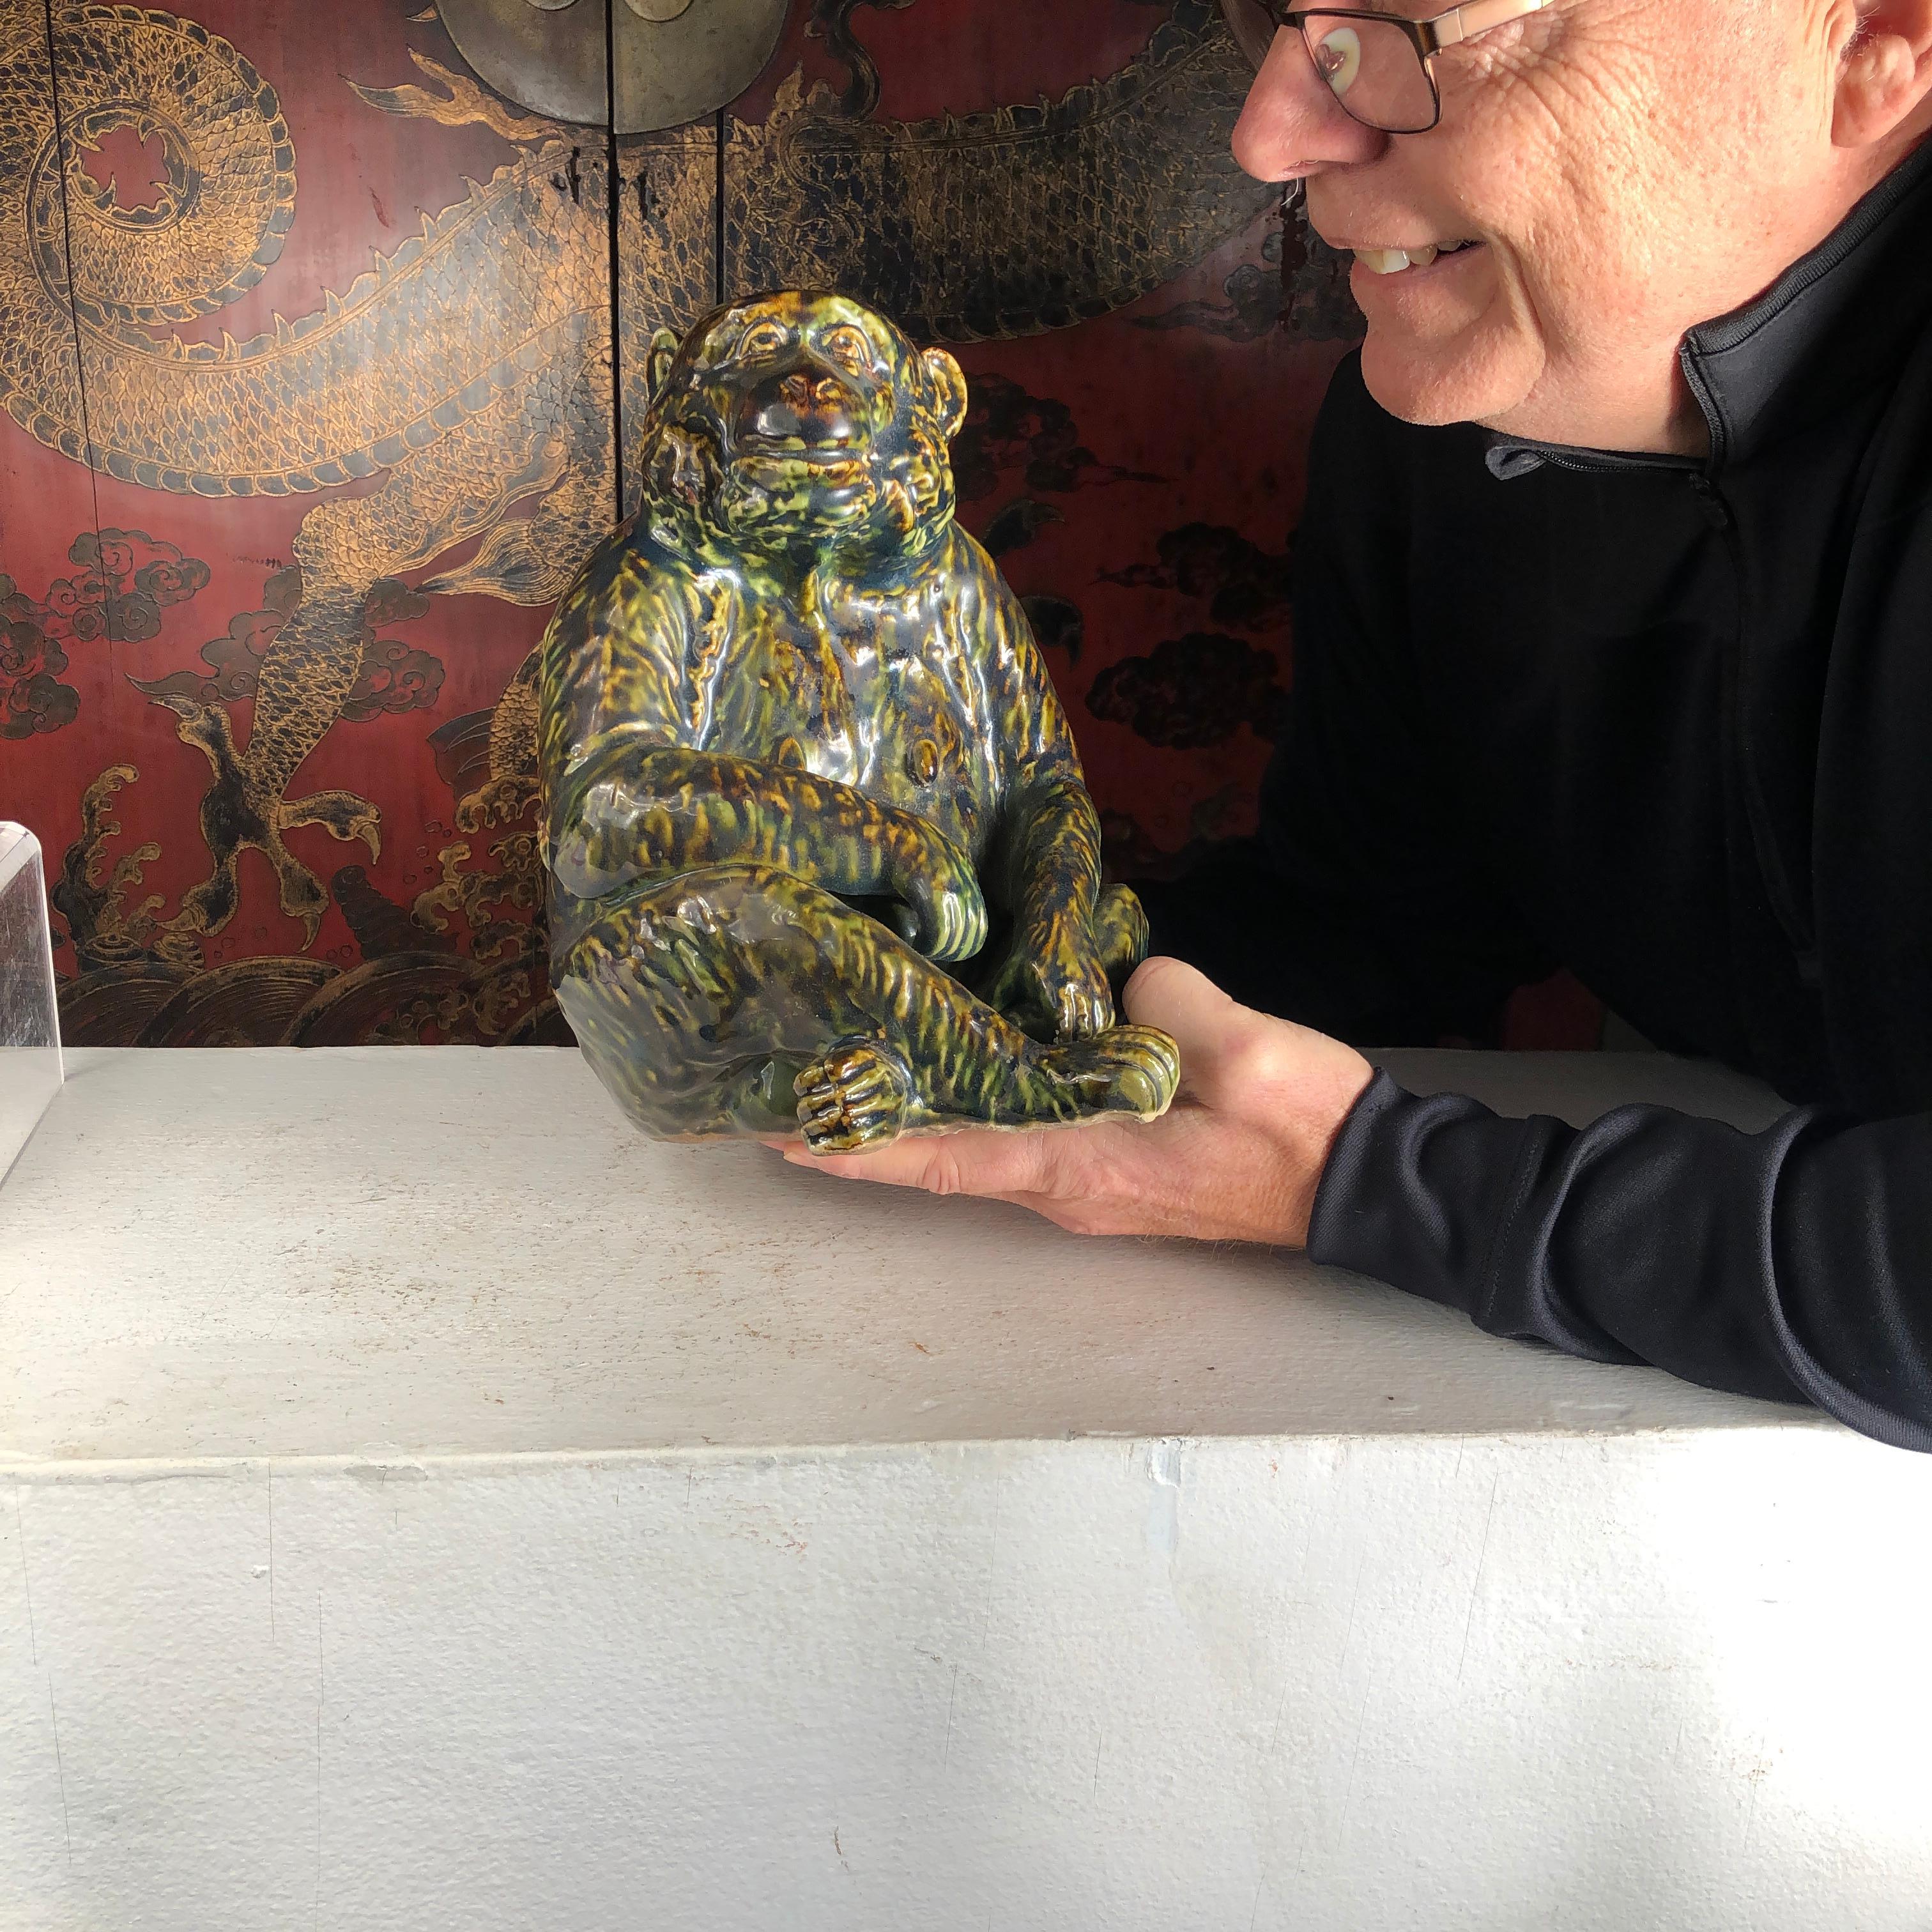 Japan, a fine large scale handmade and hand painted friendly seated monkey ceramic sculpture crafted in Japan's famous Oribe green glaze.

The handsome and friendly faced ceramic animal has finely detailed ears, eyes, mouth, hands, legs, and hand